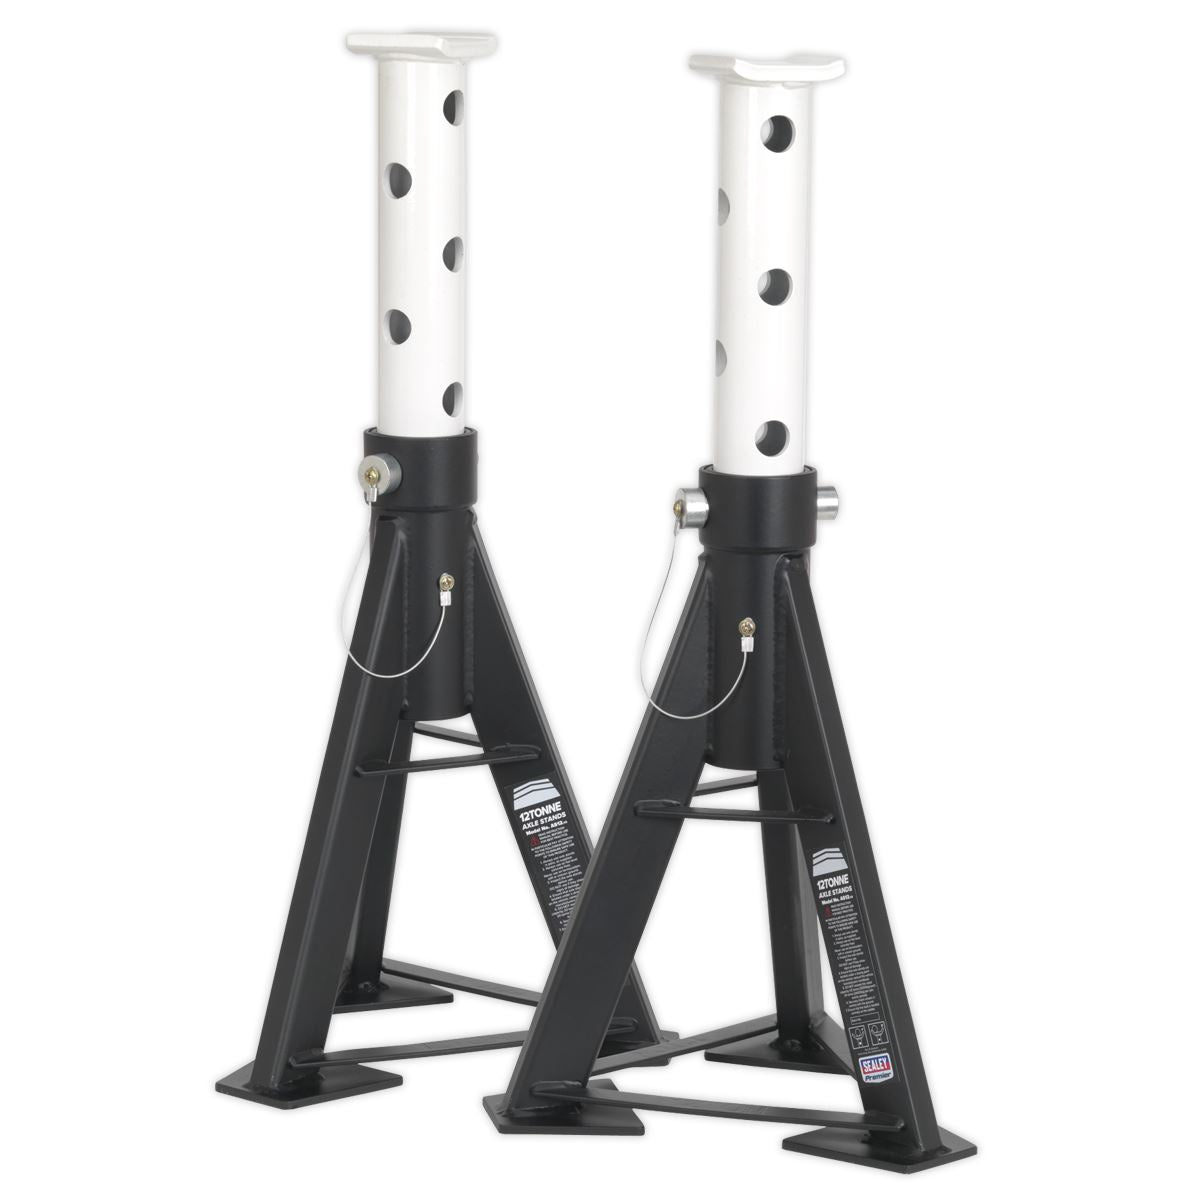 Sealey Premier Premier Axle Stands (Pair) 12 Tonne Capacity per Stand High Level